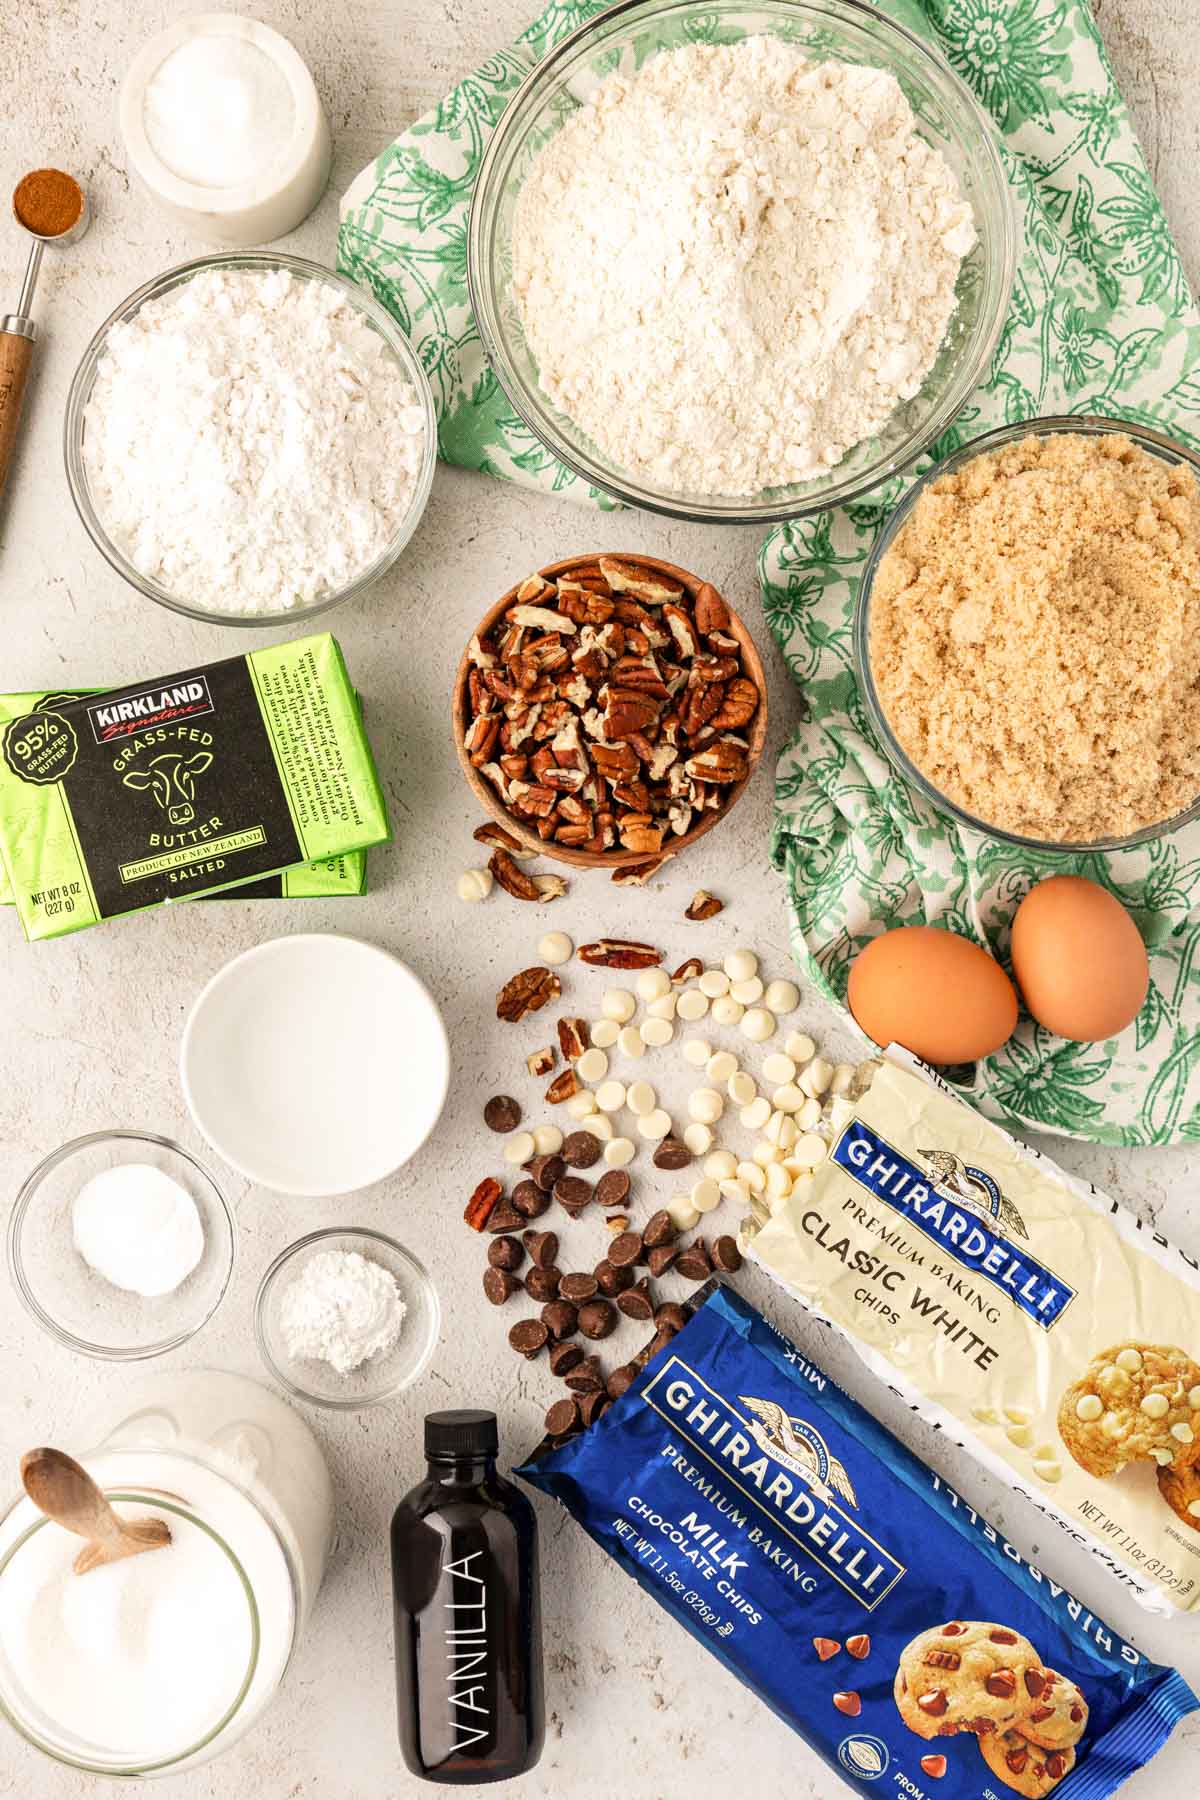 Ingredients to make Donna Kelce's Cookie recipe on a table.